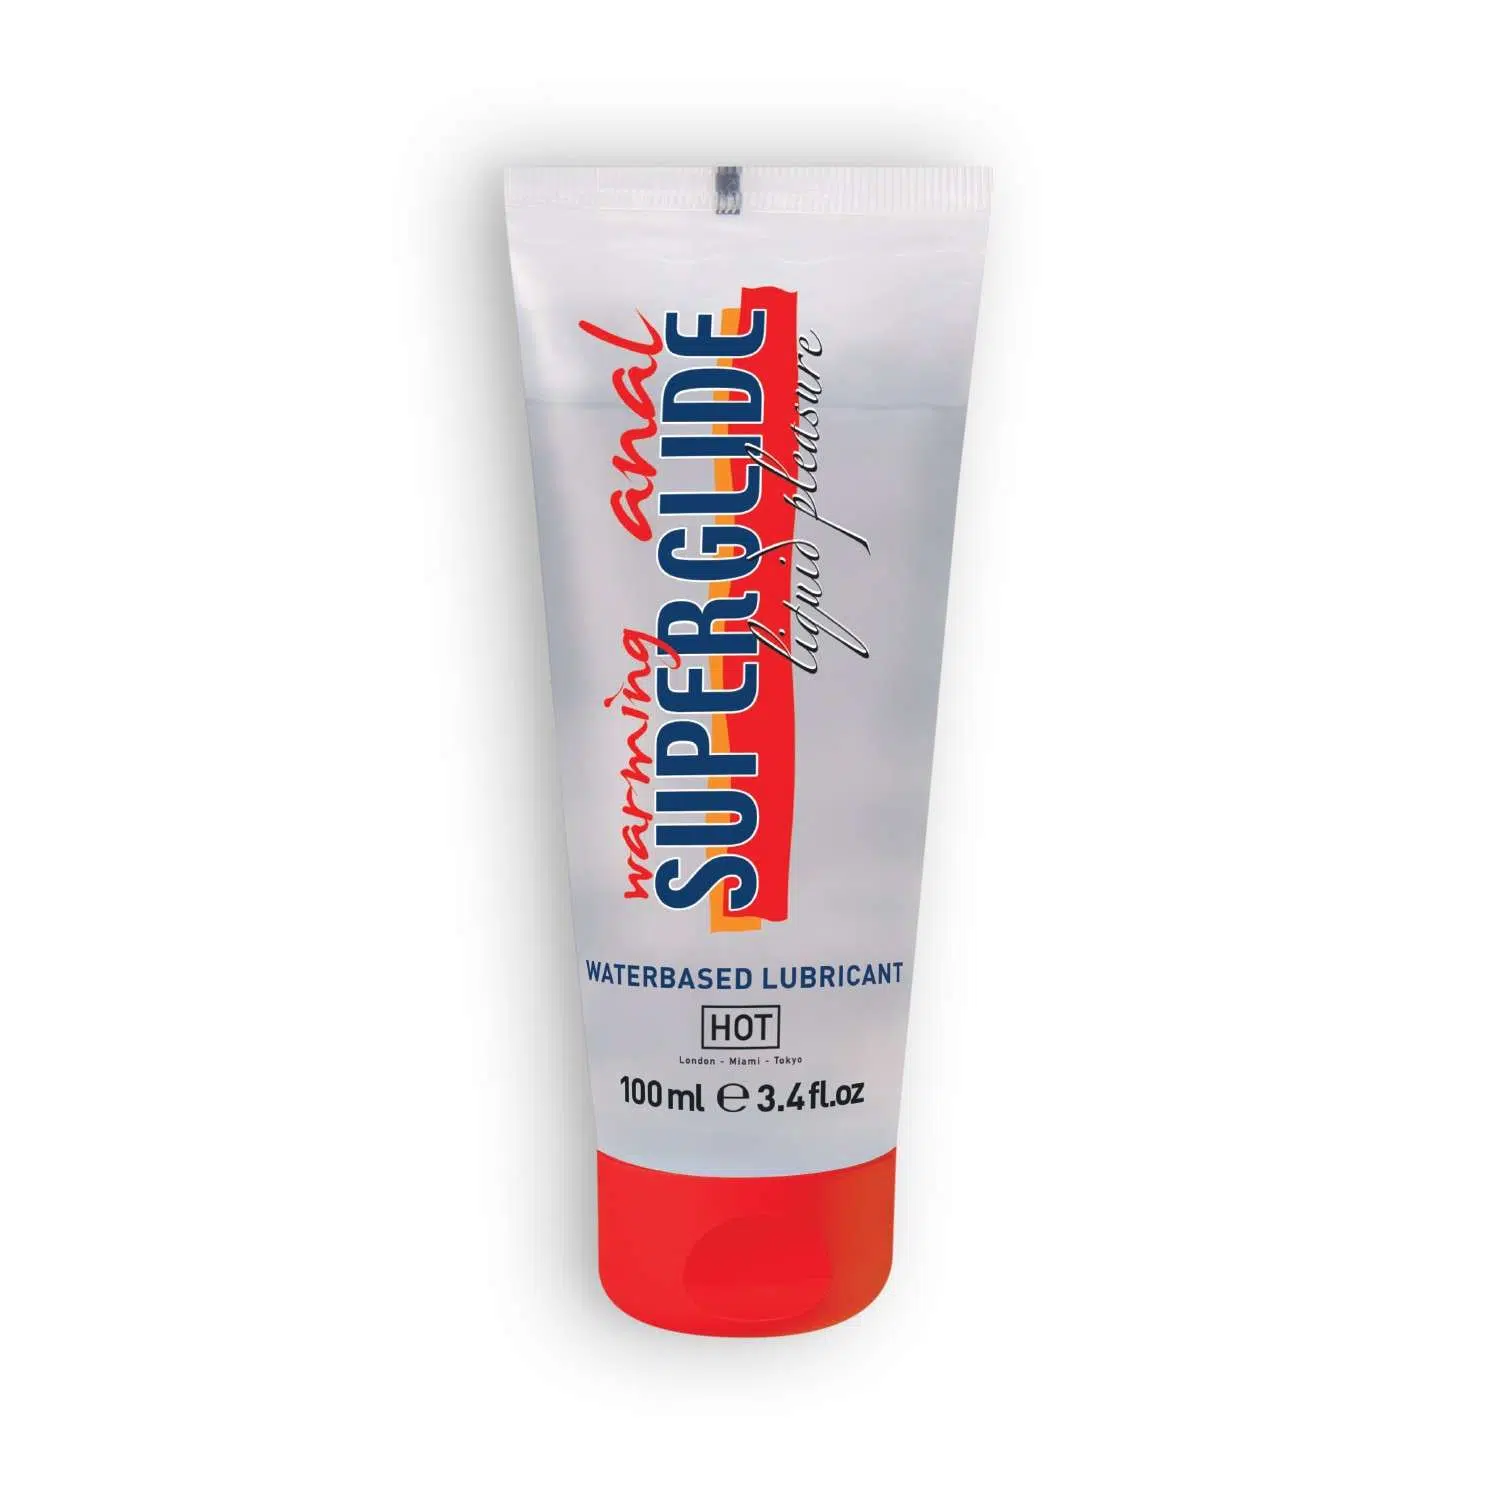 WARMING ANAL SUPERGLIDE WATERBASED LUBRICANT HOT    100ML